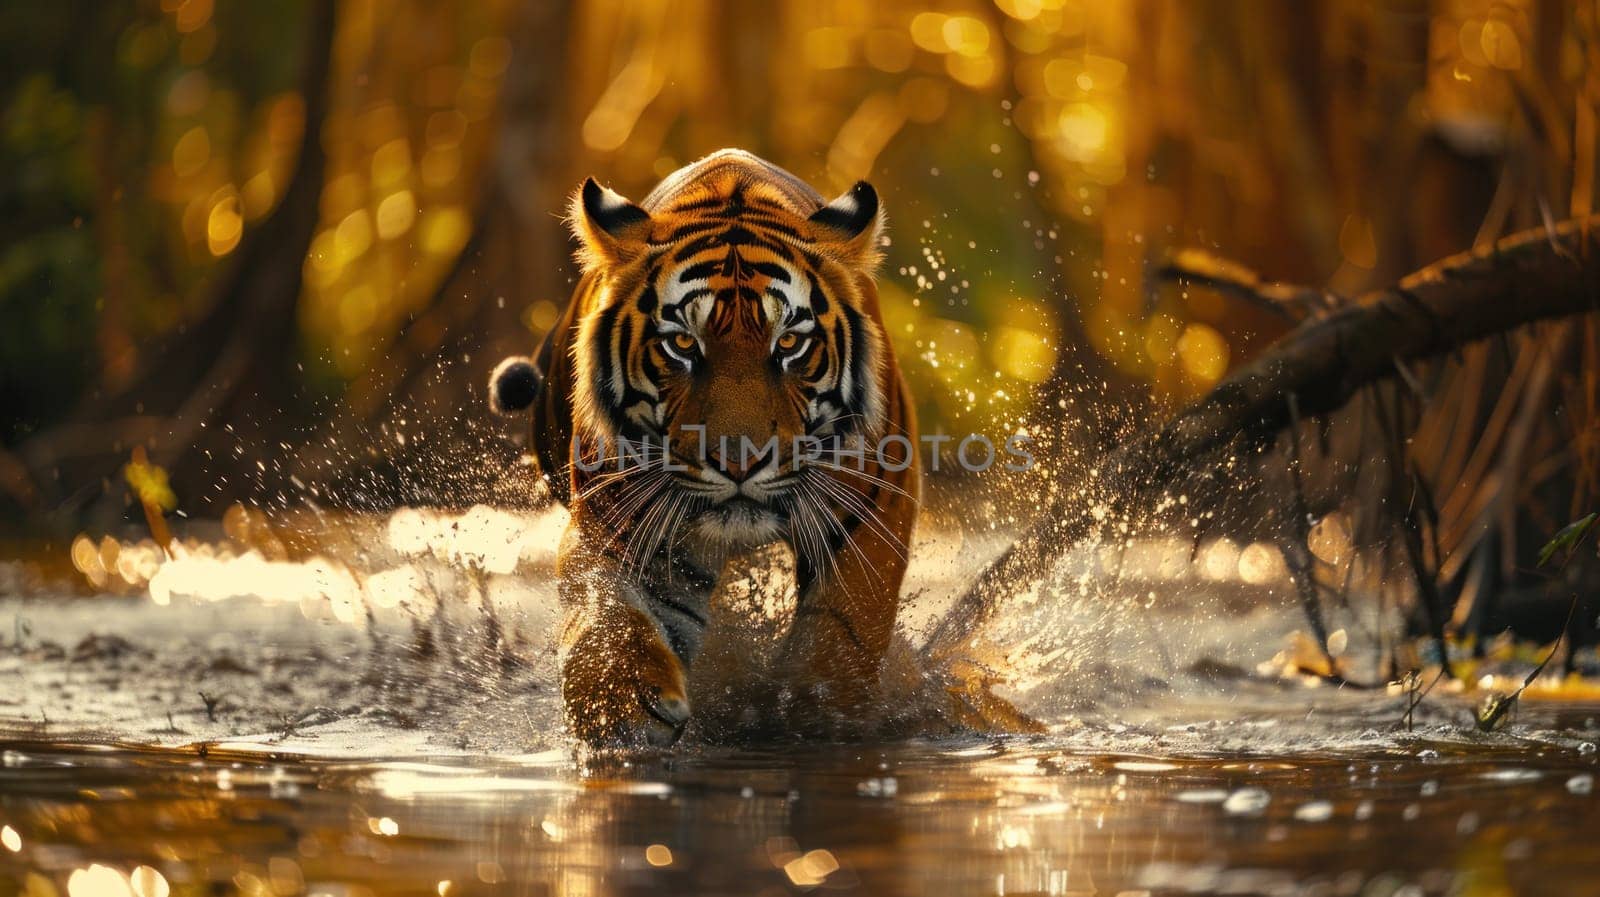 A tiger is running through the water, leaving a trail of splashes behind it.